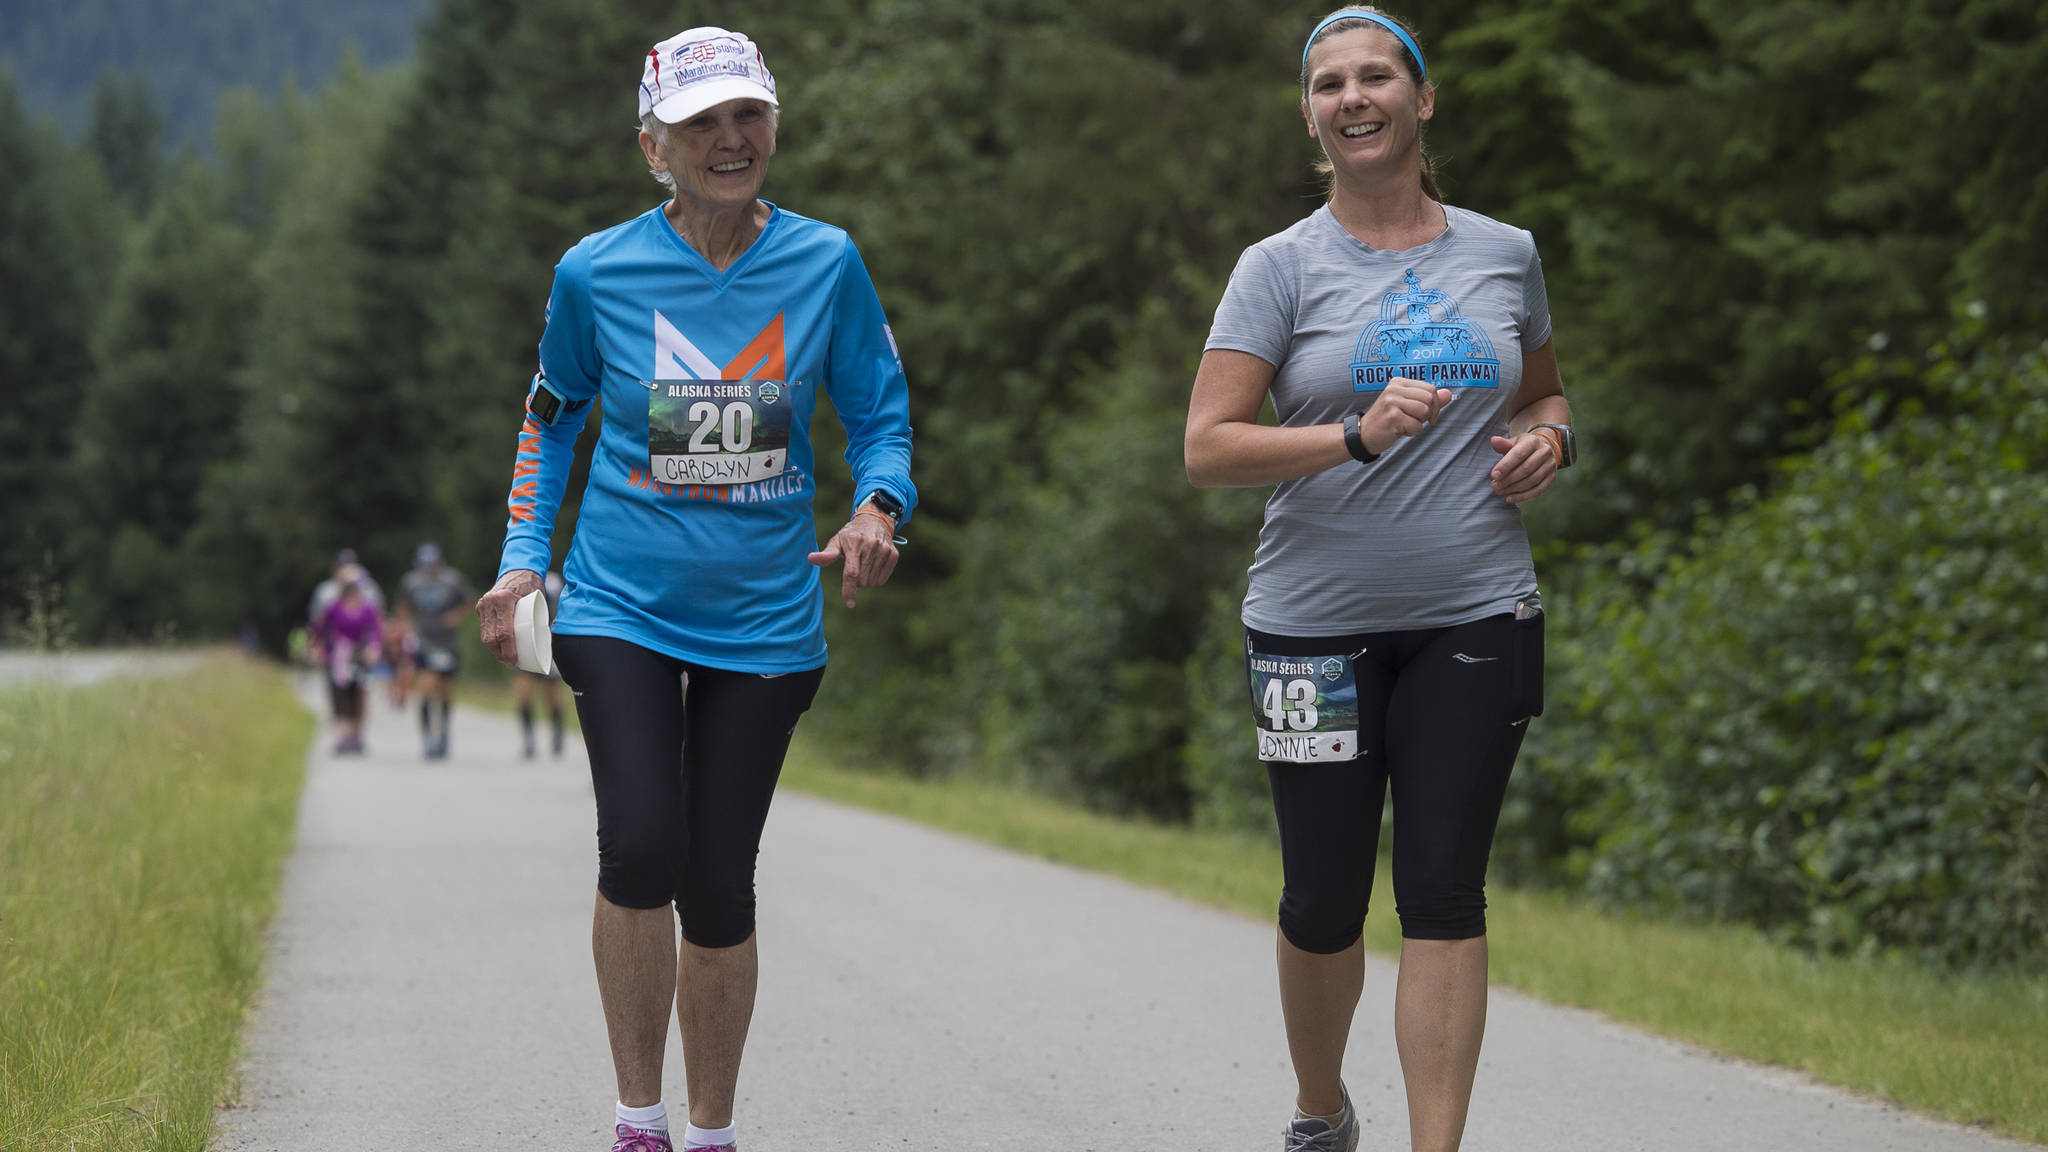 Carolyn Mitchell runs with her daughter, Connie Deverill, in a marathon coordinated by Mainly Marathons along Mendenhall Loop Road on Thursday, July 26, 2018. For Mitchell, 81, it was her 175th marathon. (Michael Penn | Juneau Empire)